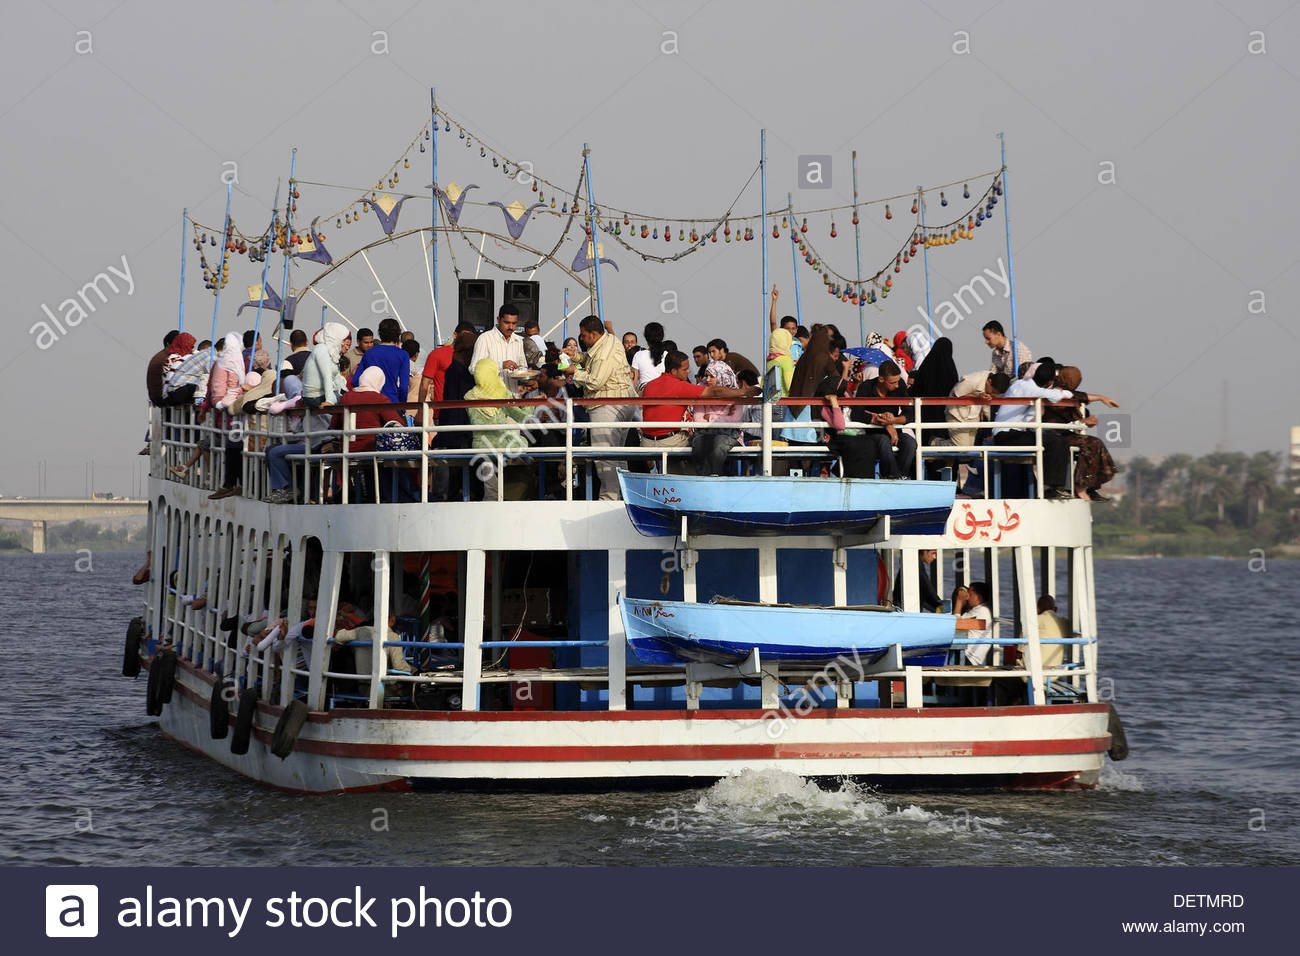 Image result for party along river nile,cairo